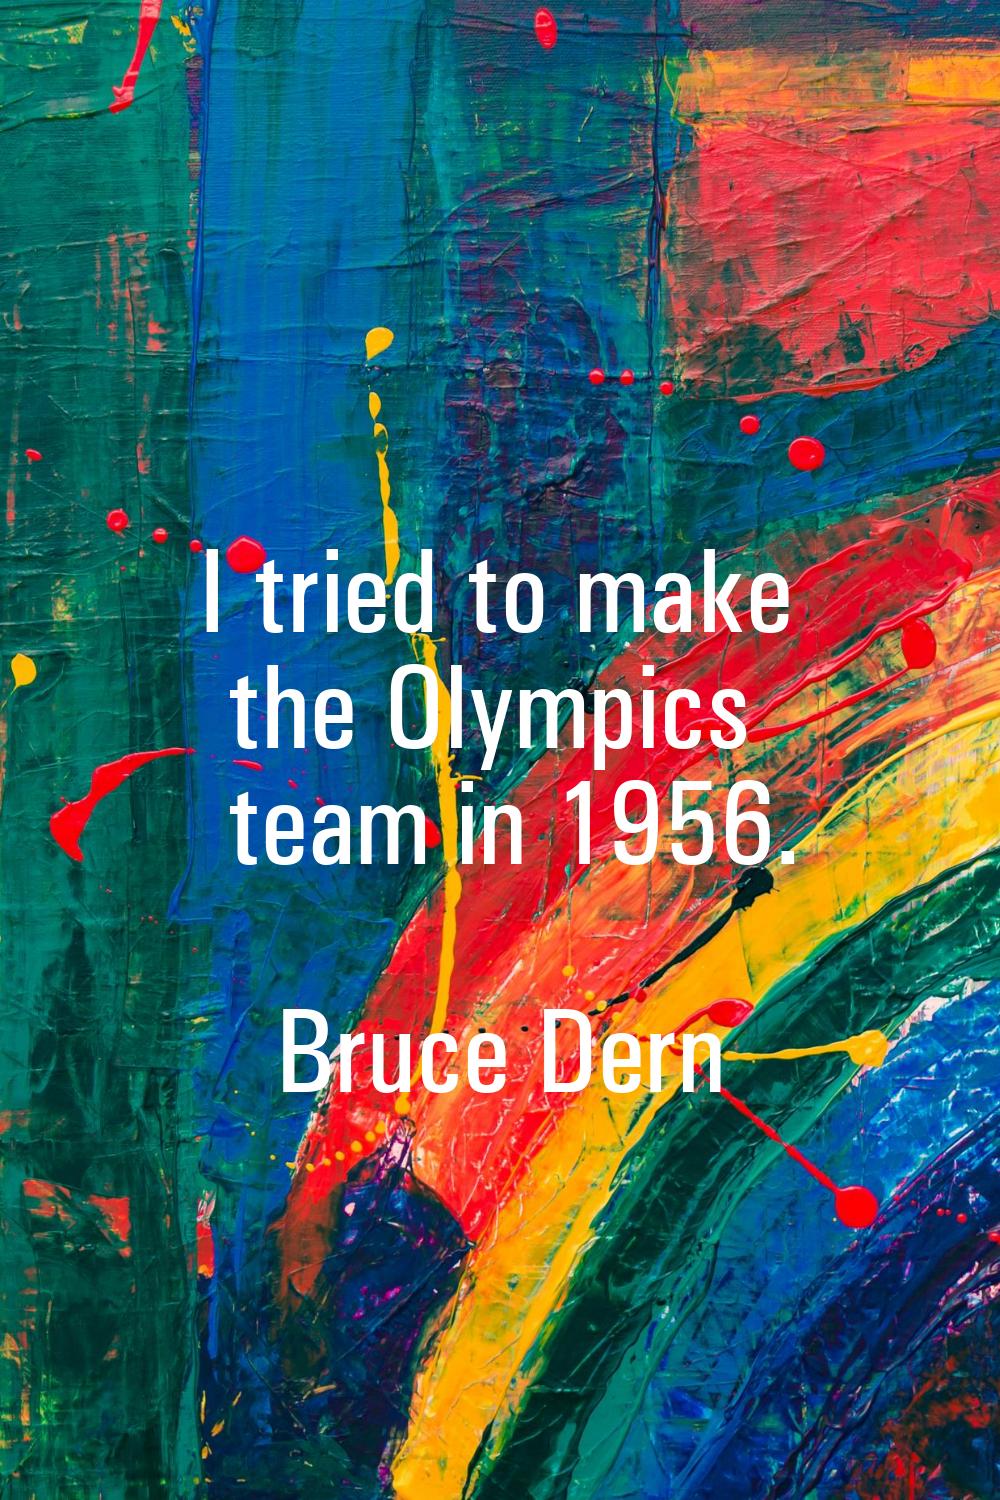 I tried to make the Olympics team in 1956.